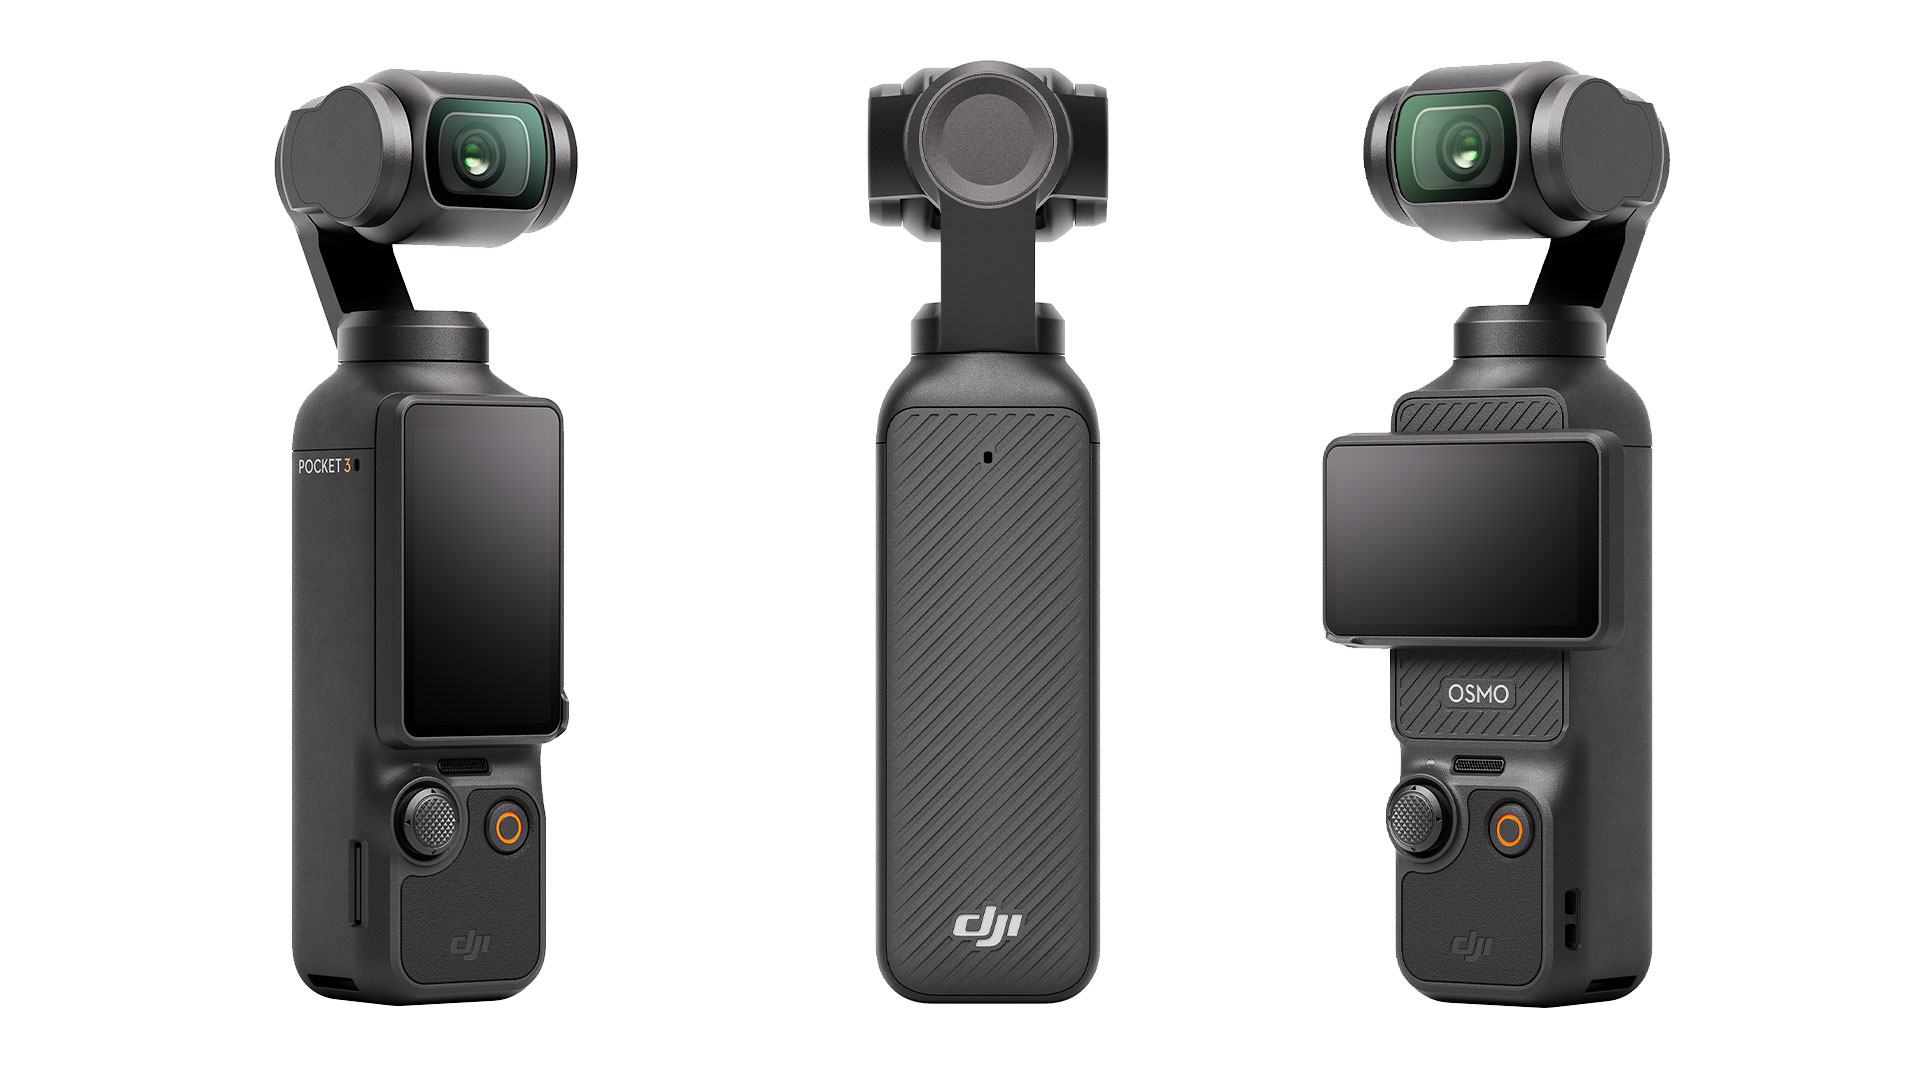 DJI Osmo Action 3 camera boasts stabilized 4K/120fps recording